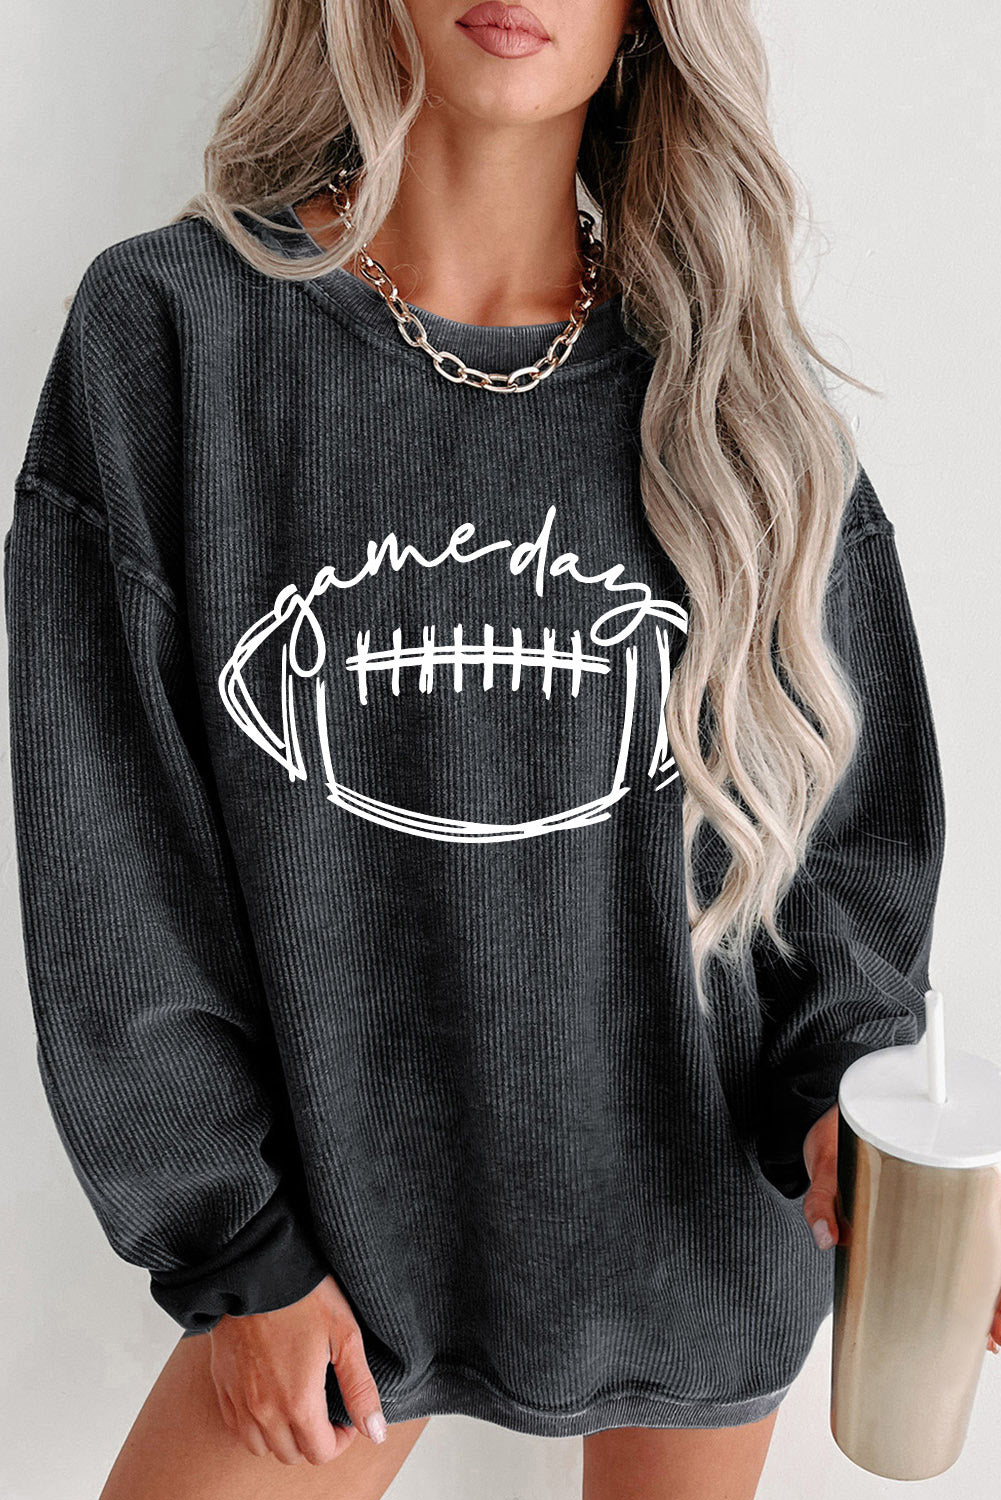 Black Corded Texture Game Day Graphic Sweatshirt Black 100%Polyester Graphic Sweatshirts JT's Designer Fashion